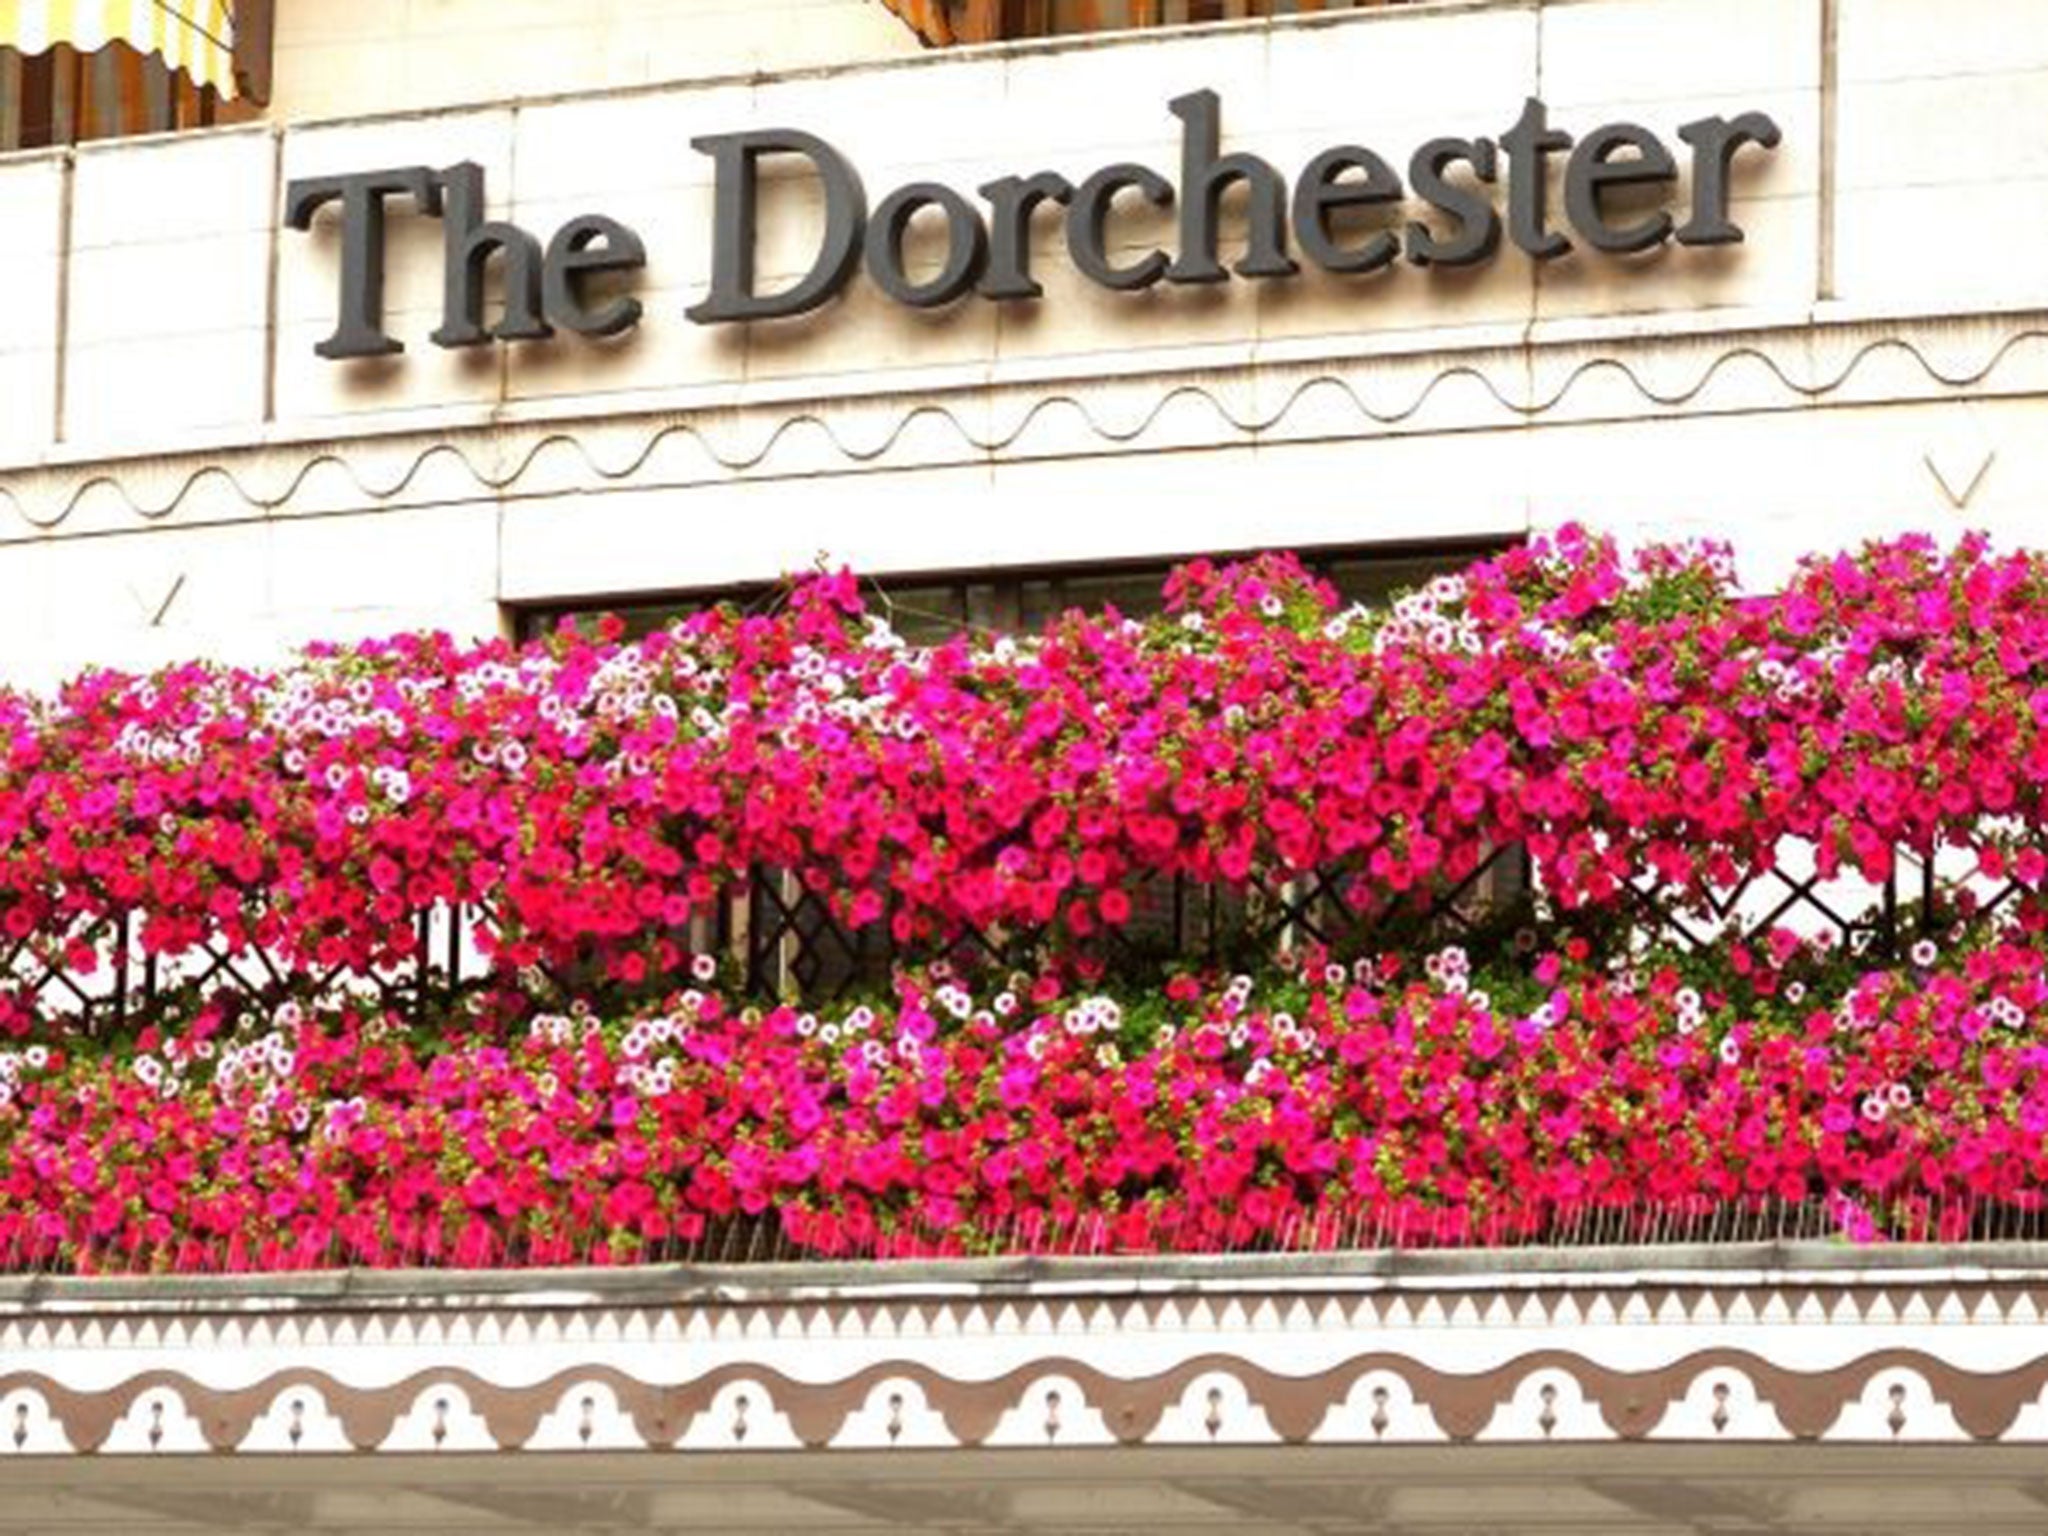 The main entrance to the Dorchester Hotel in Park Lane, central London